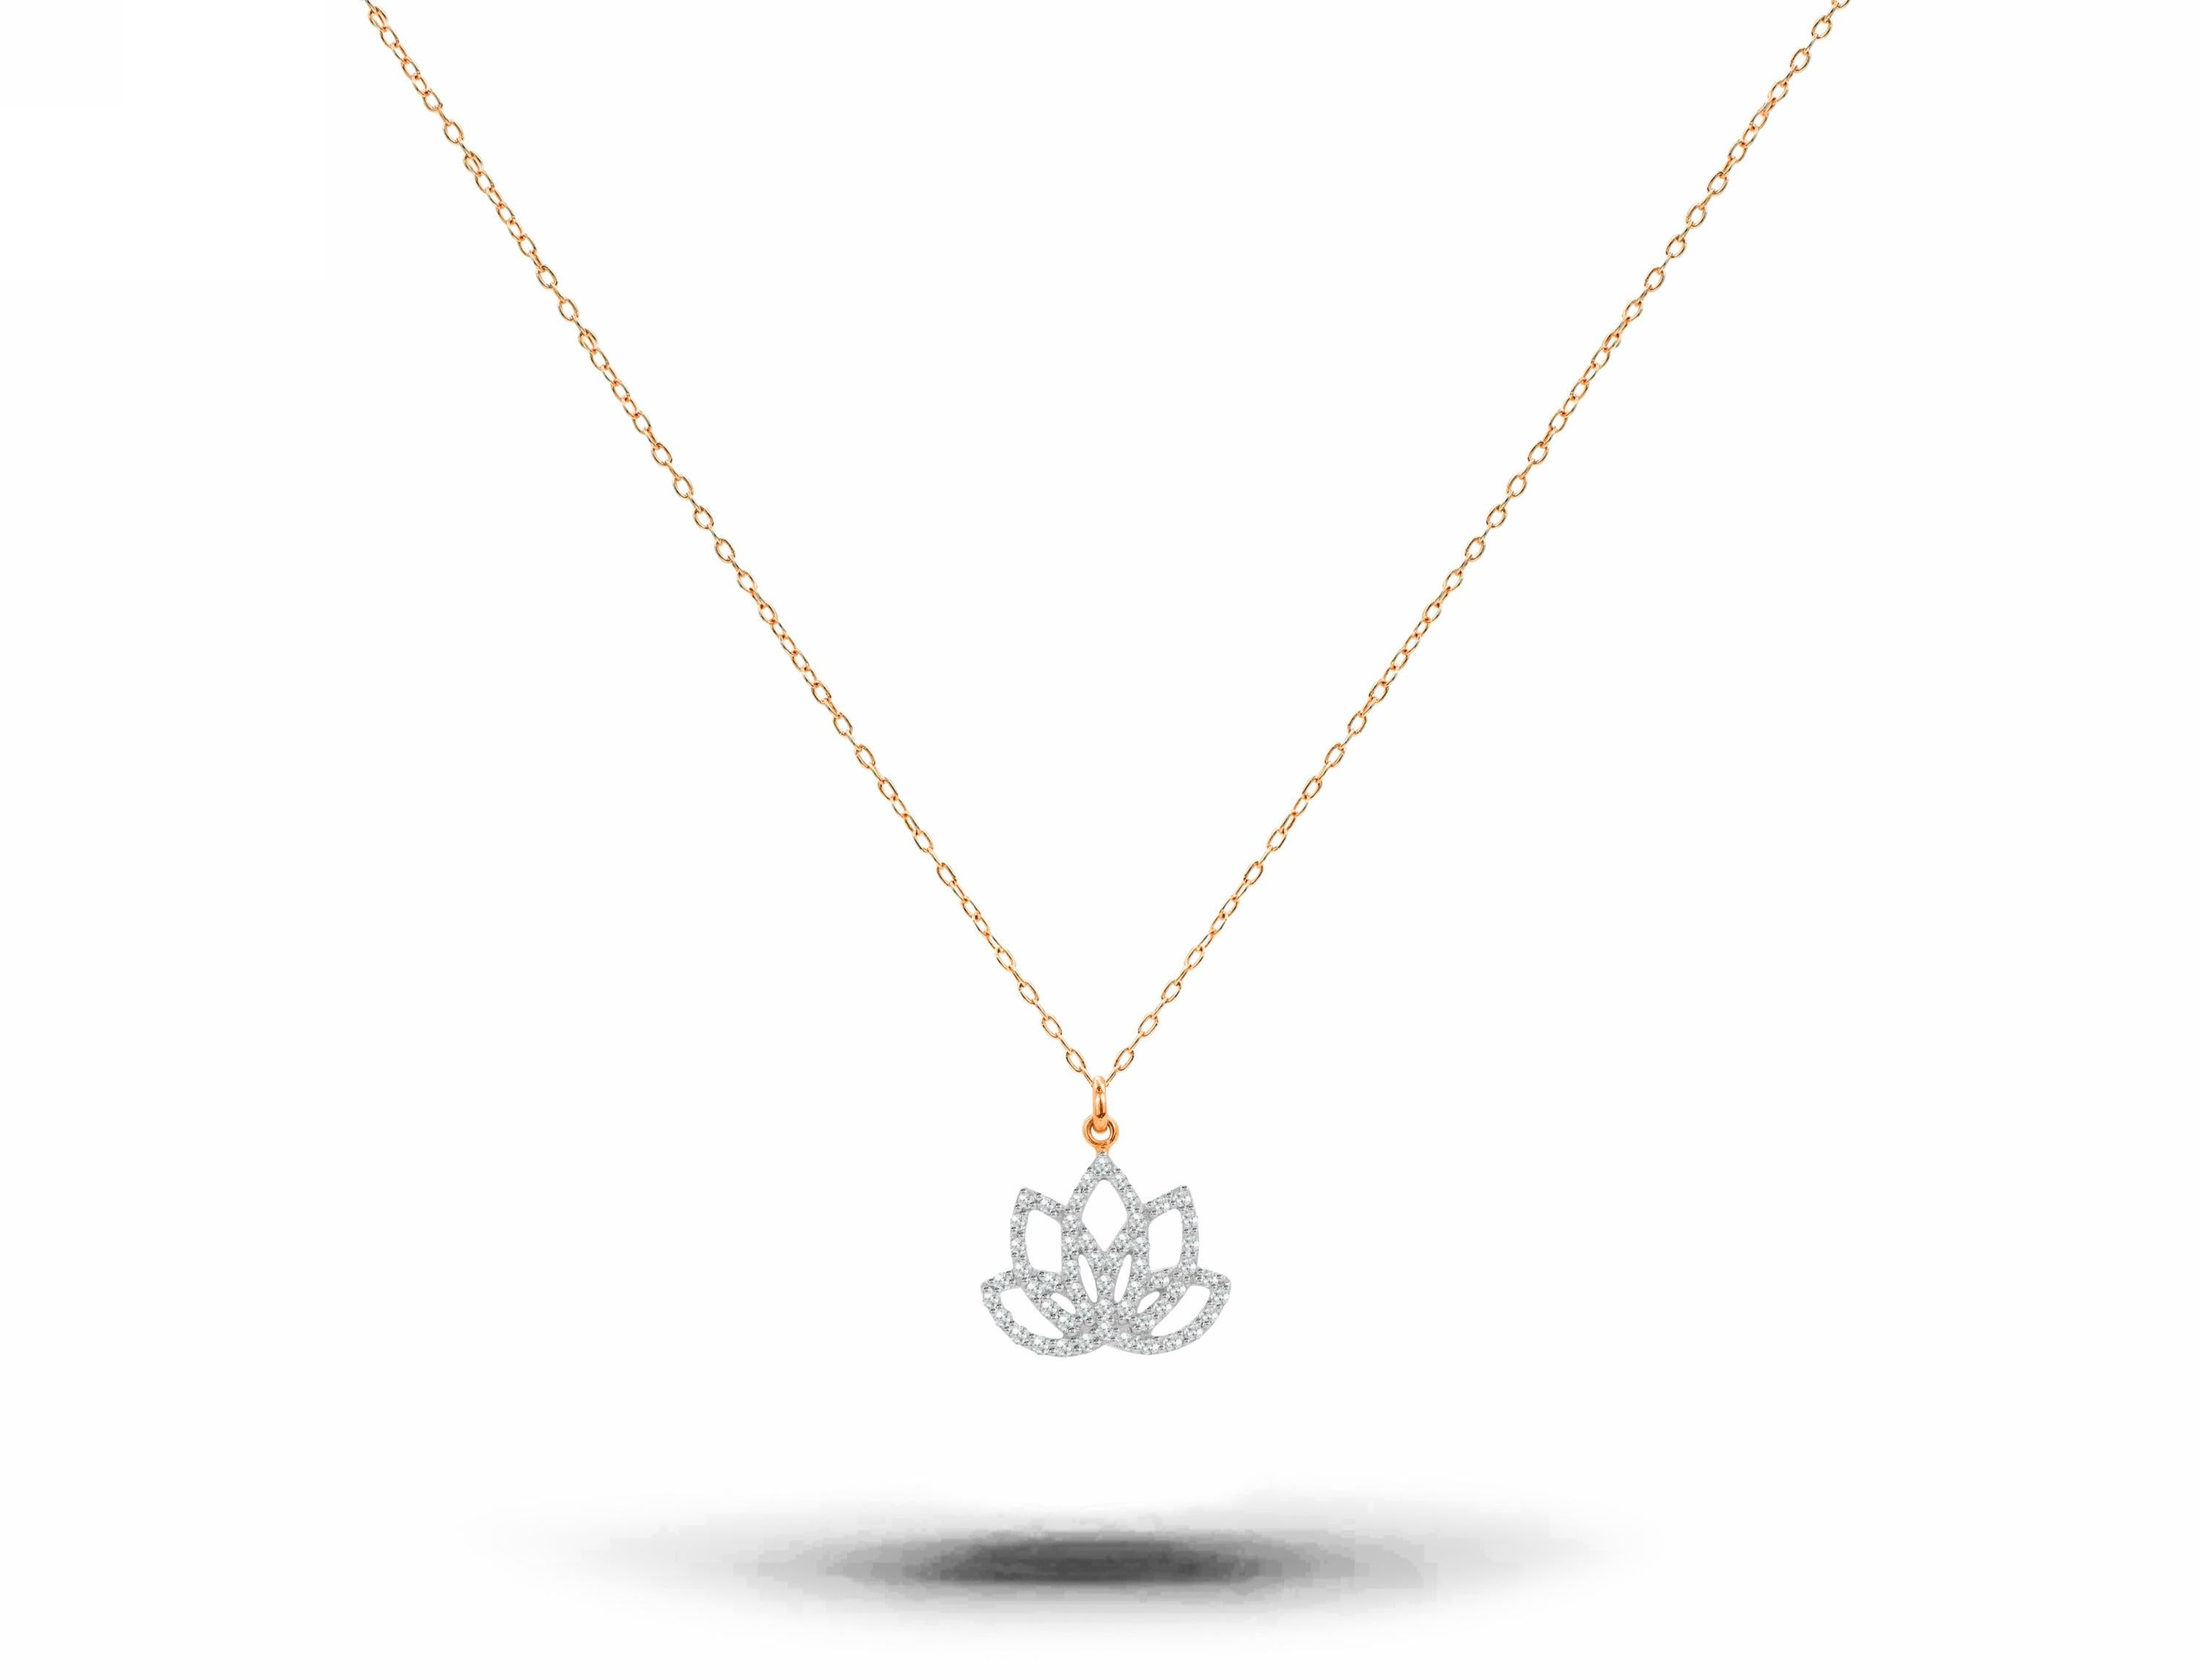 Diamond Lotus Necklace made of 18k solid gold available in three colors, White Gold / Rose Gold / Yellow Gold.

Natural genuine round cut diamond each diamond is hand selected by me to ensure quality and set by a master setter in our studio. Diamond